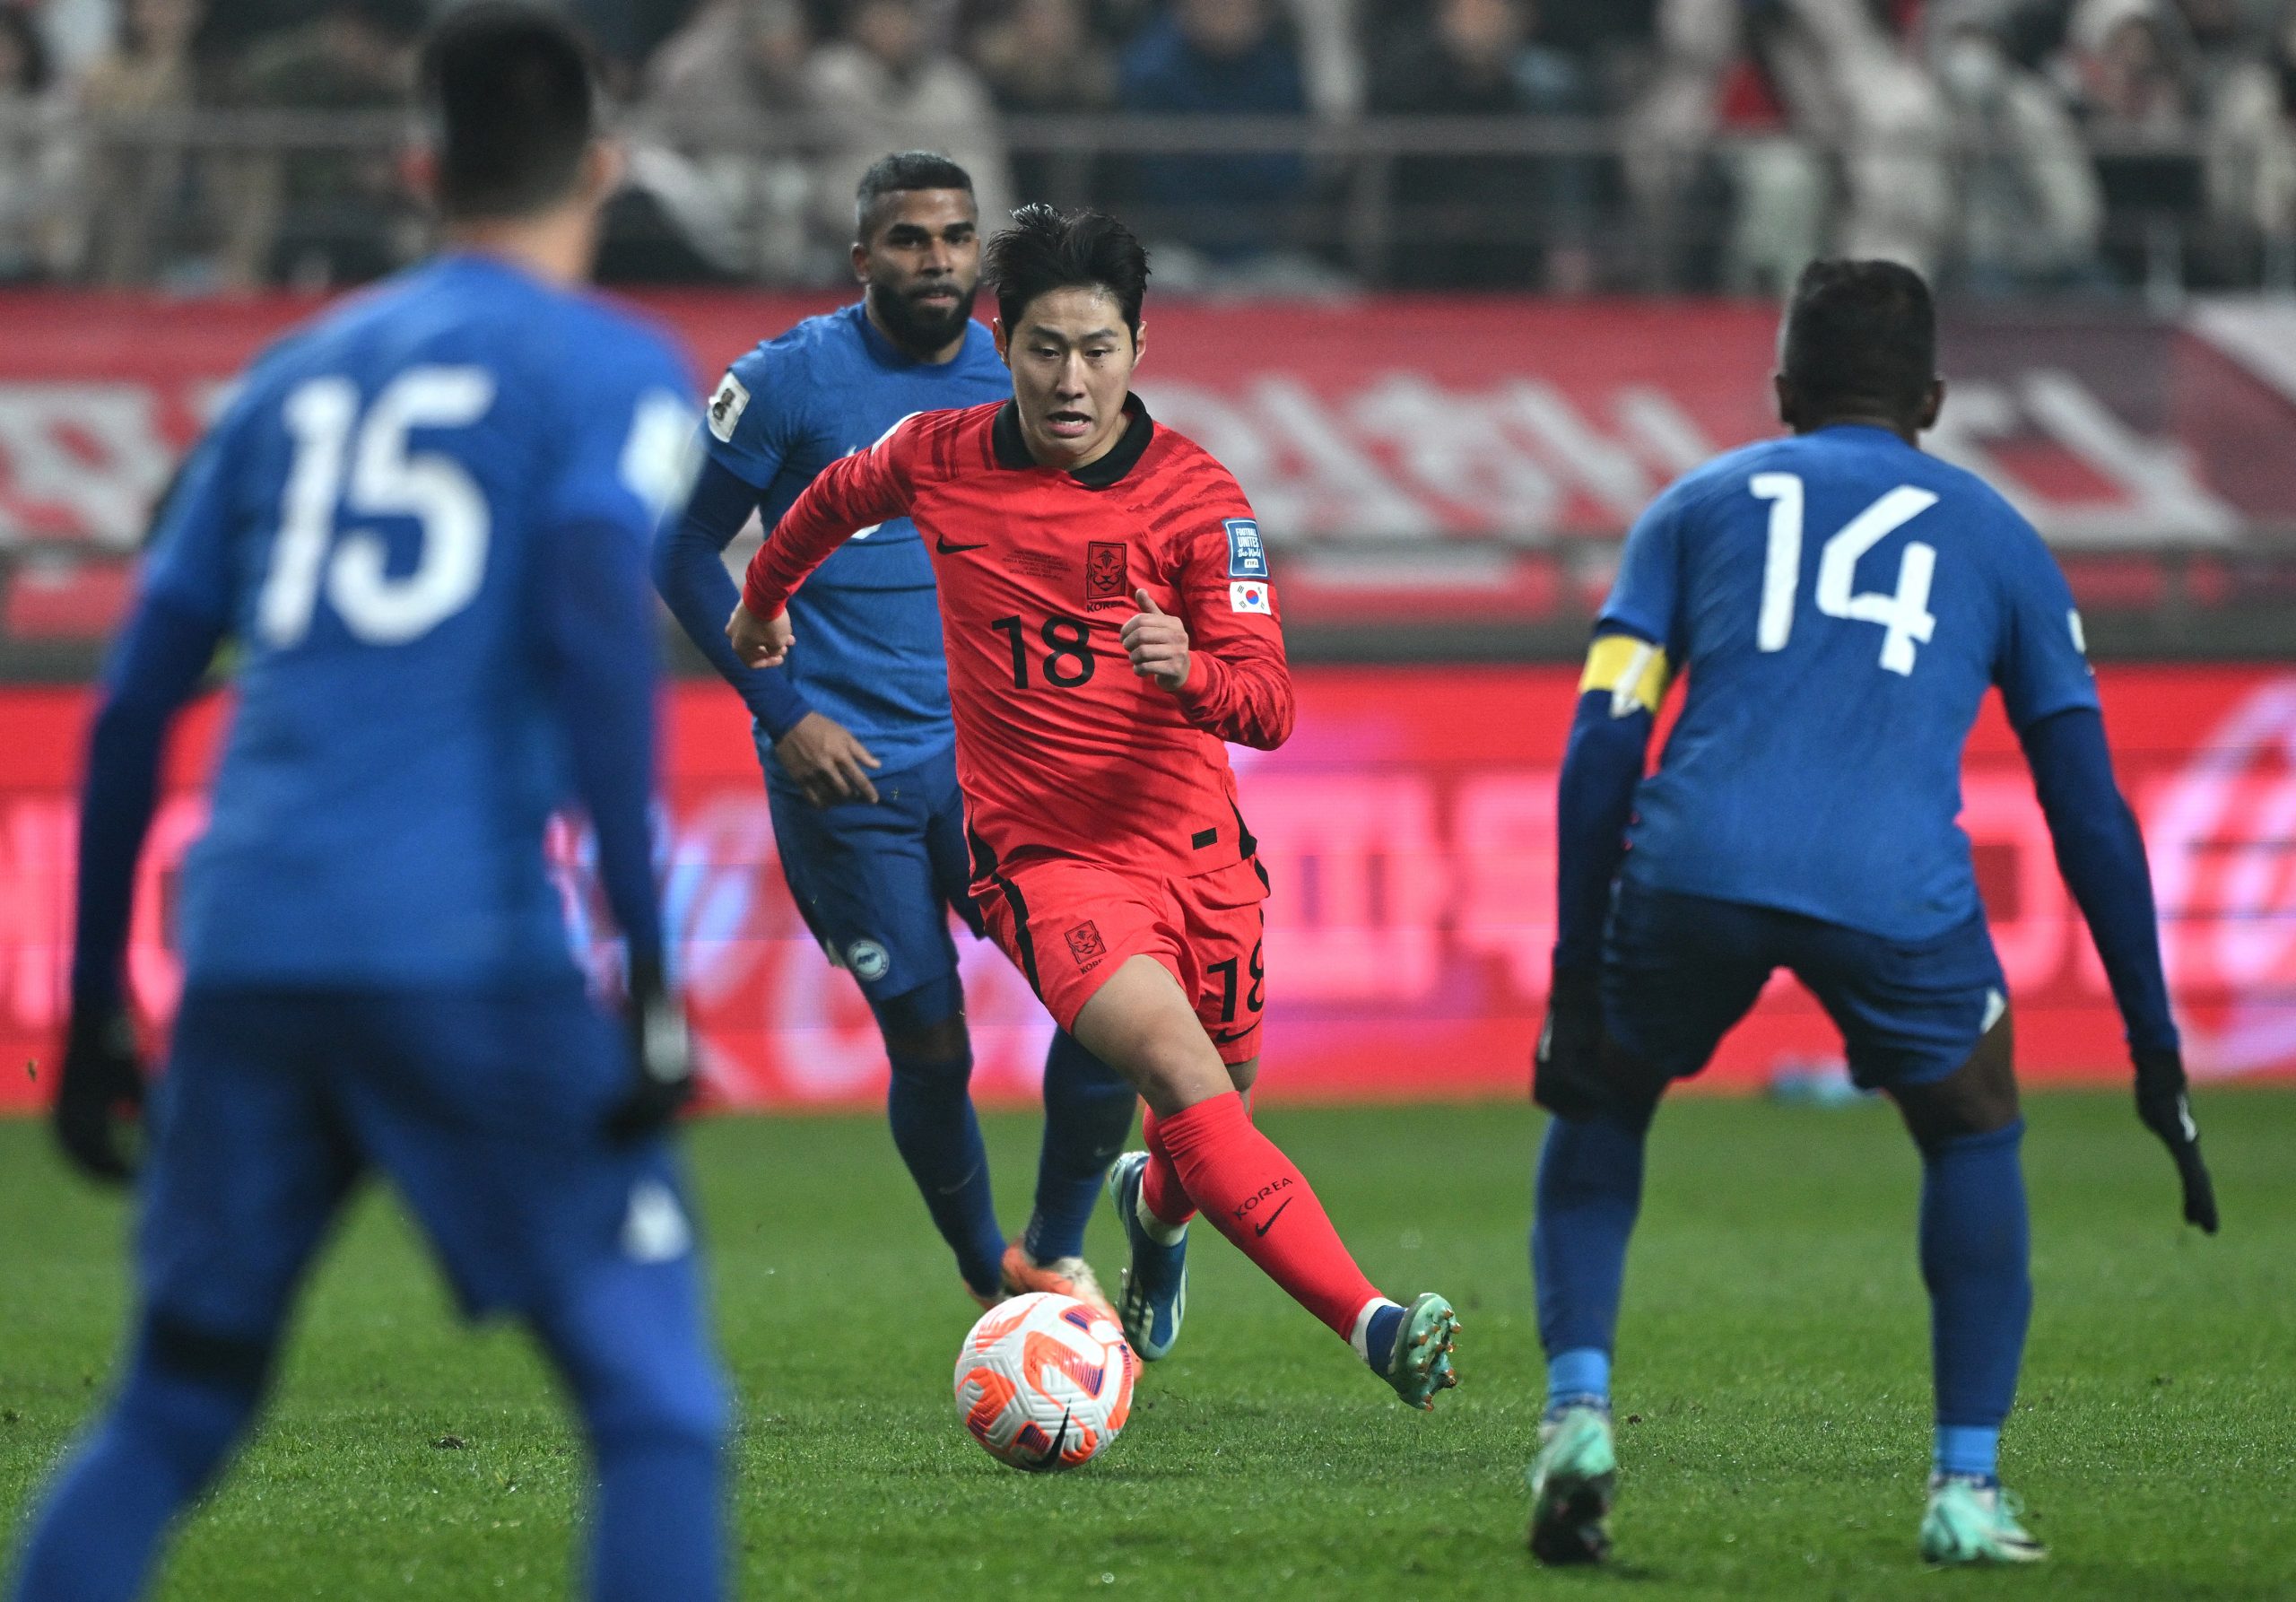 Lee must stay humble, says South Korea manager Klinsmann of PSG playmaker